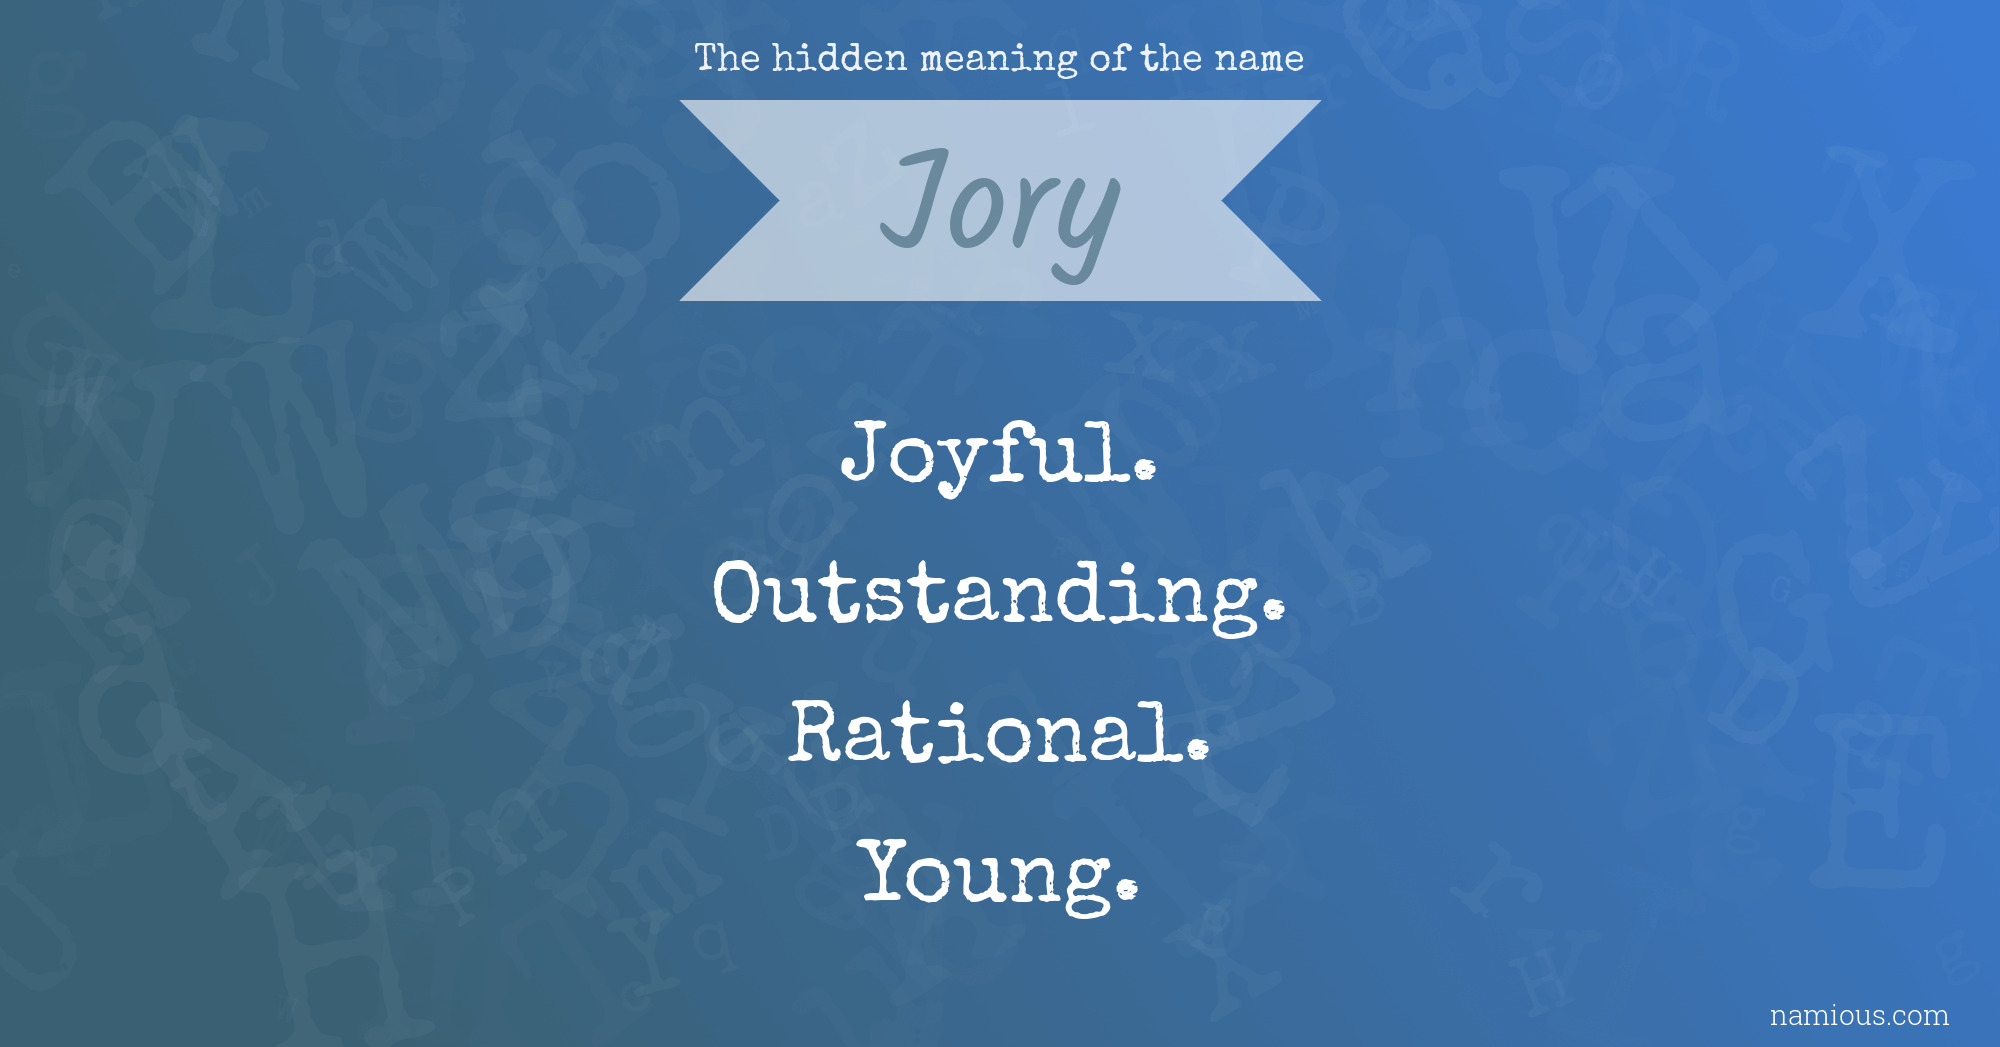 The hidden meaning of the name Jory